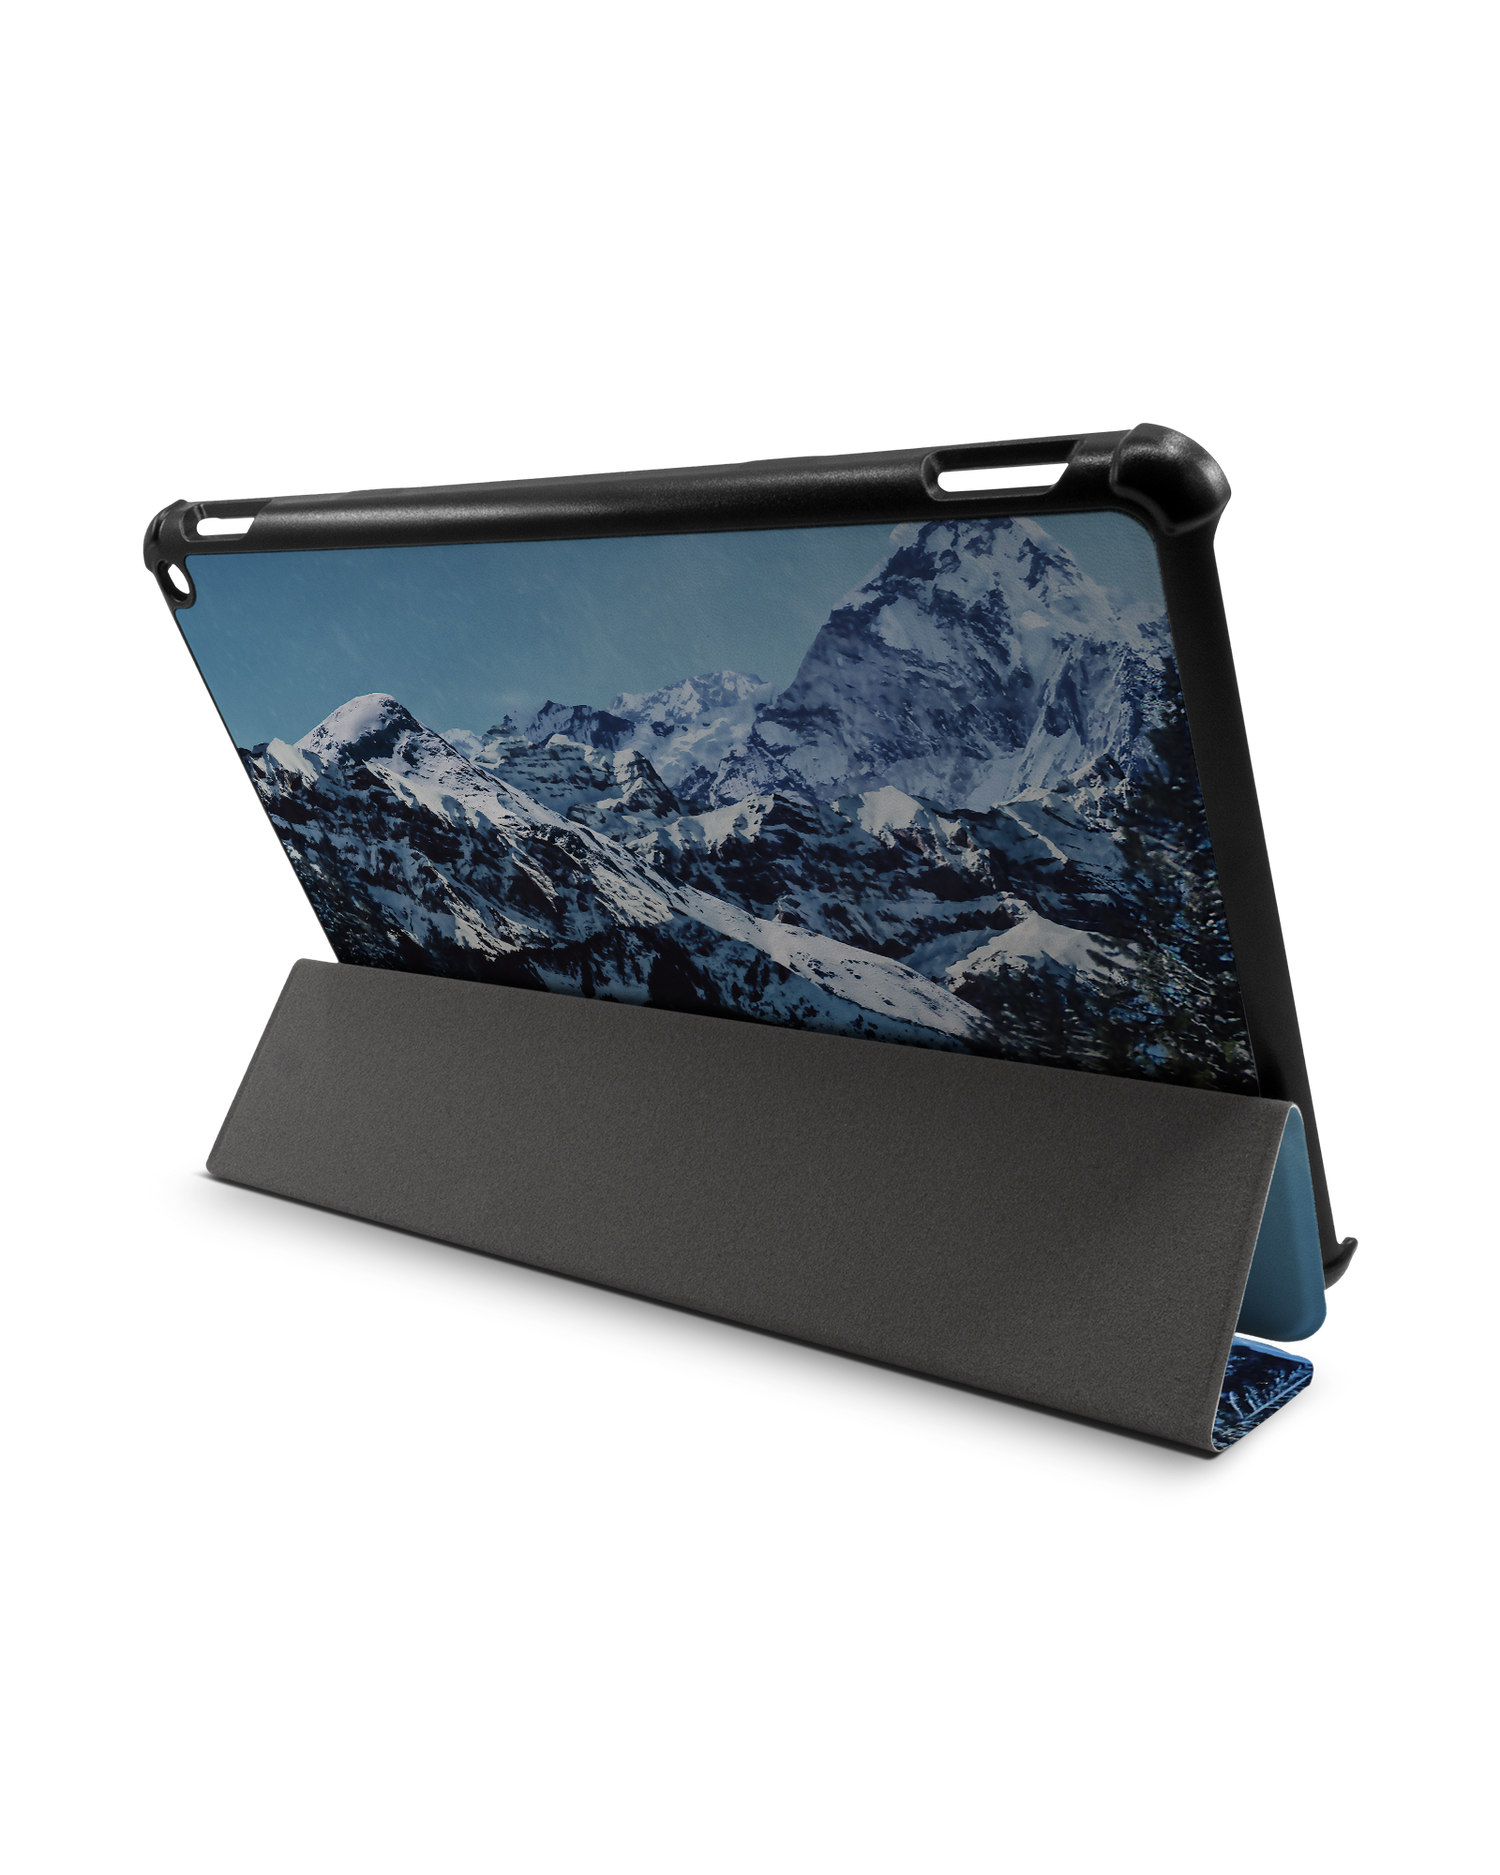 Winter Landscape Tablet Smart Case Amazon Fire HD 10 (2021): Used as Stand